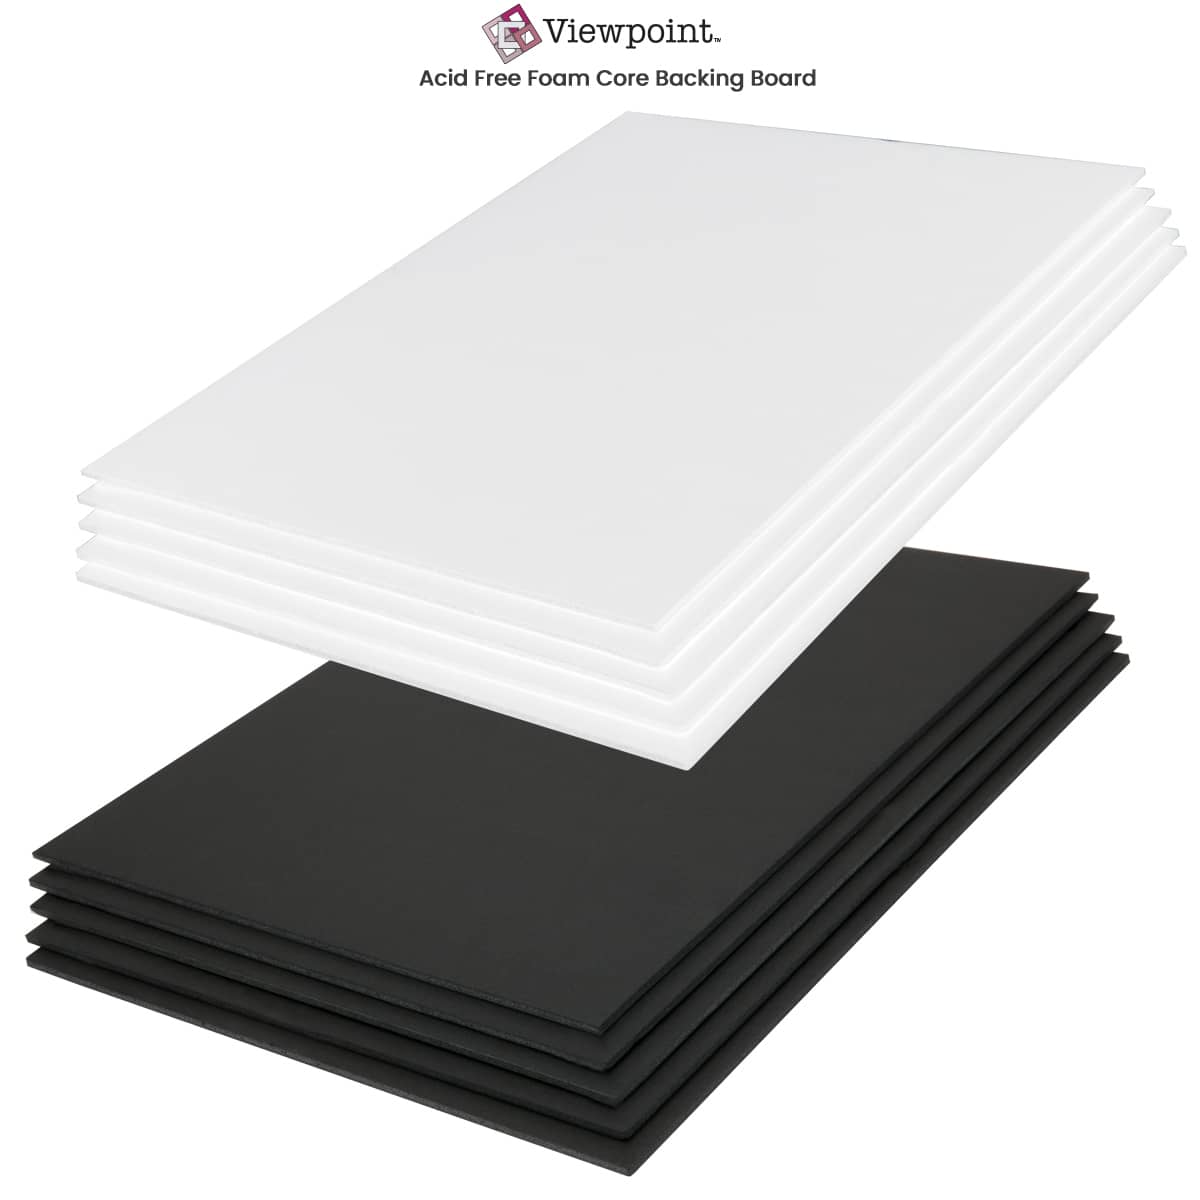 Foam Core Backing Board 3/16 White 1 Side Self Adhesive 24x36- 50 Pack.  Many Sizes Available. Acid Free Buffered Craft Poster Board for Signs